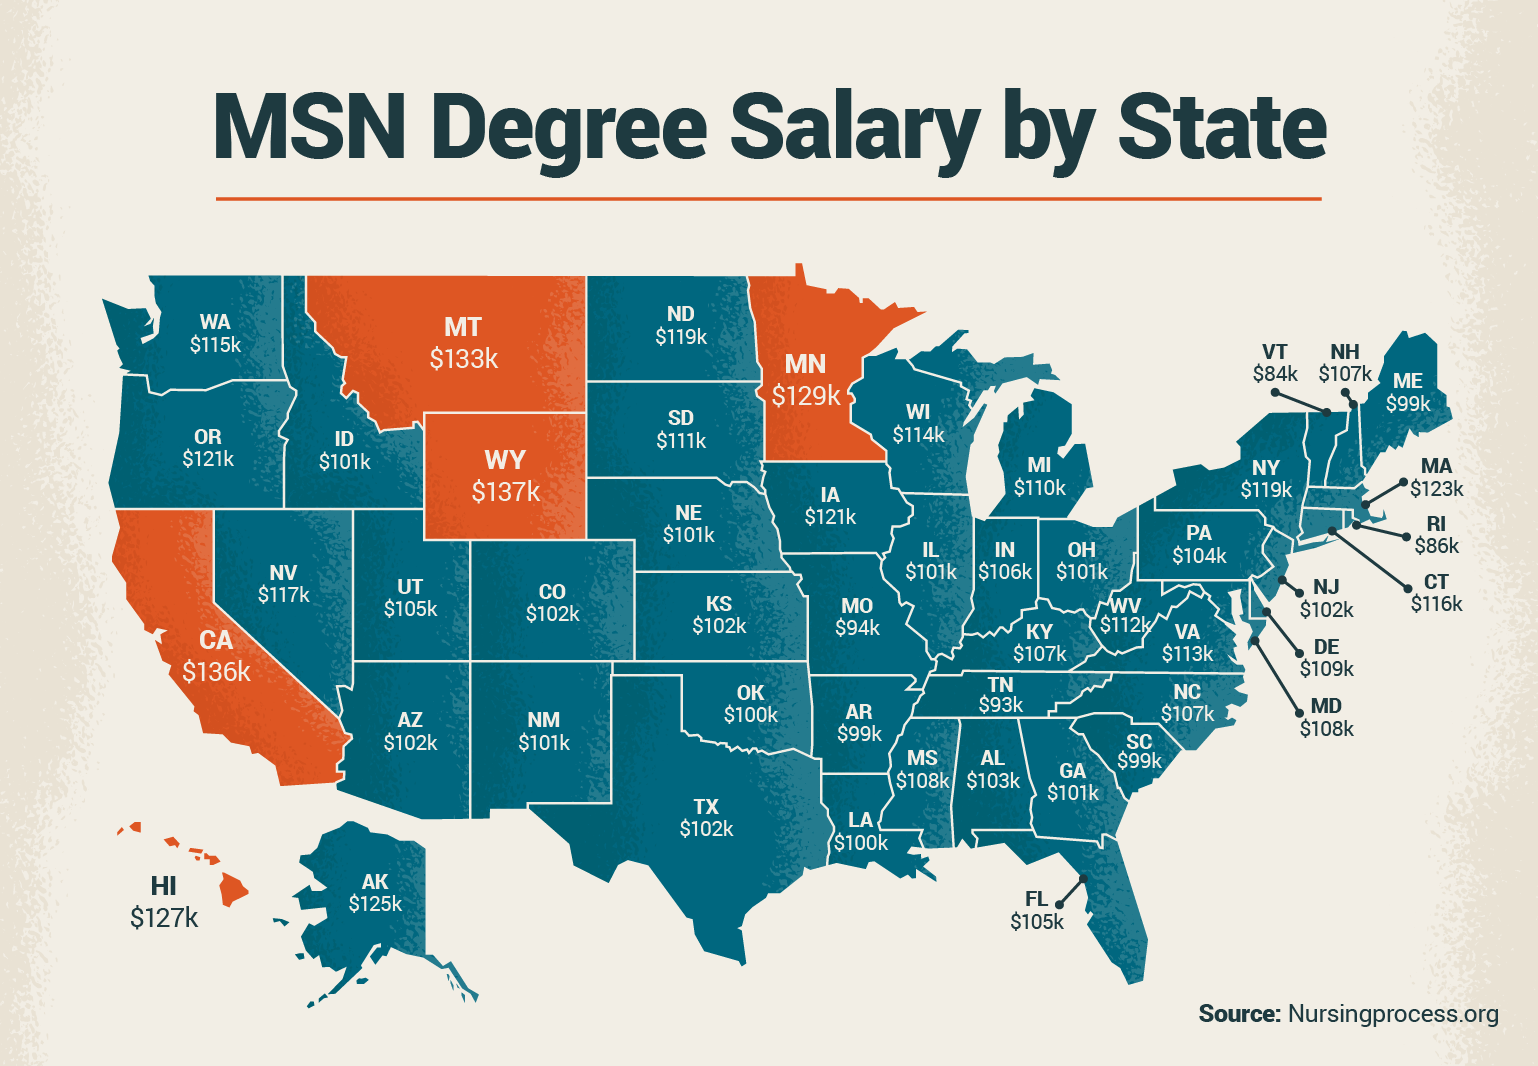 MSN Degree Salary by State